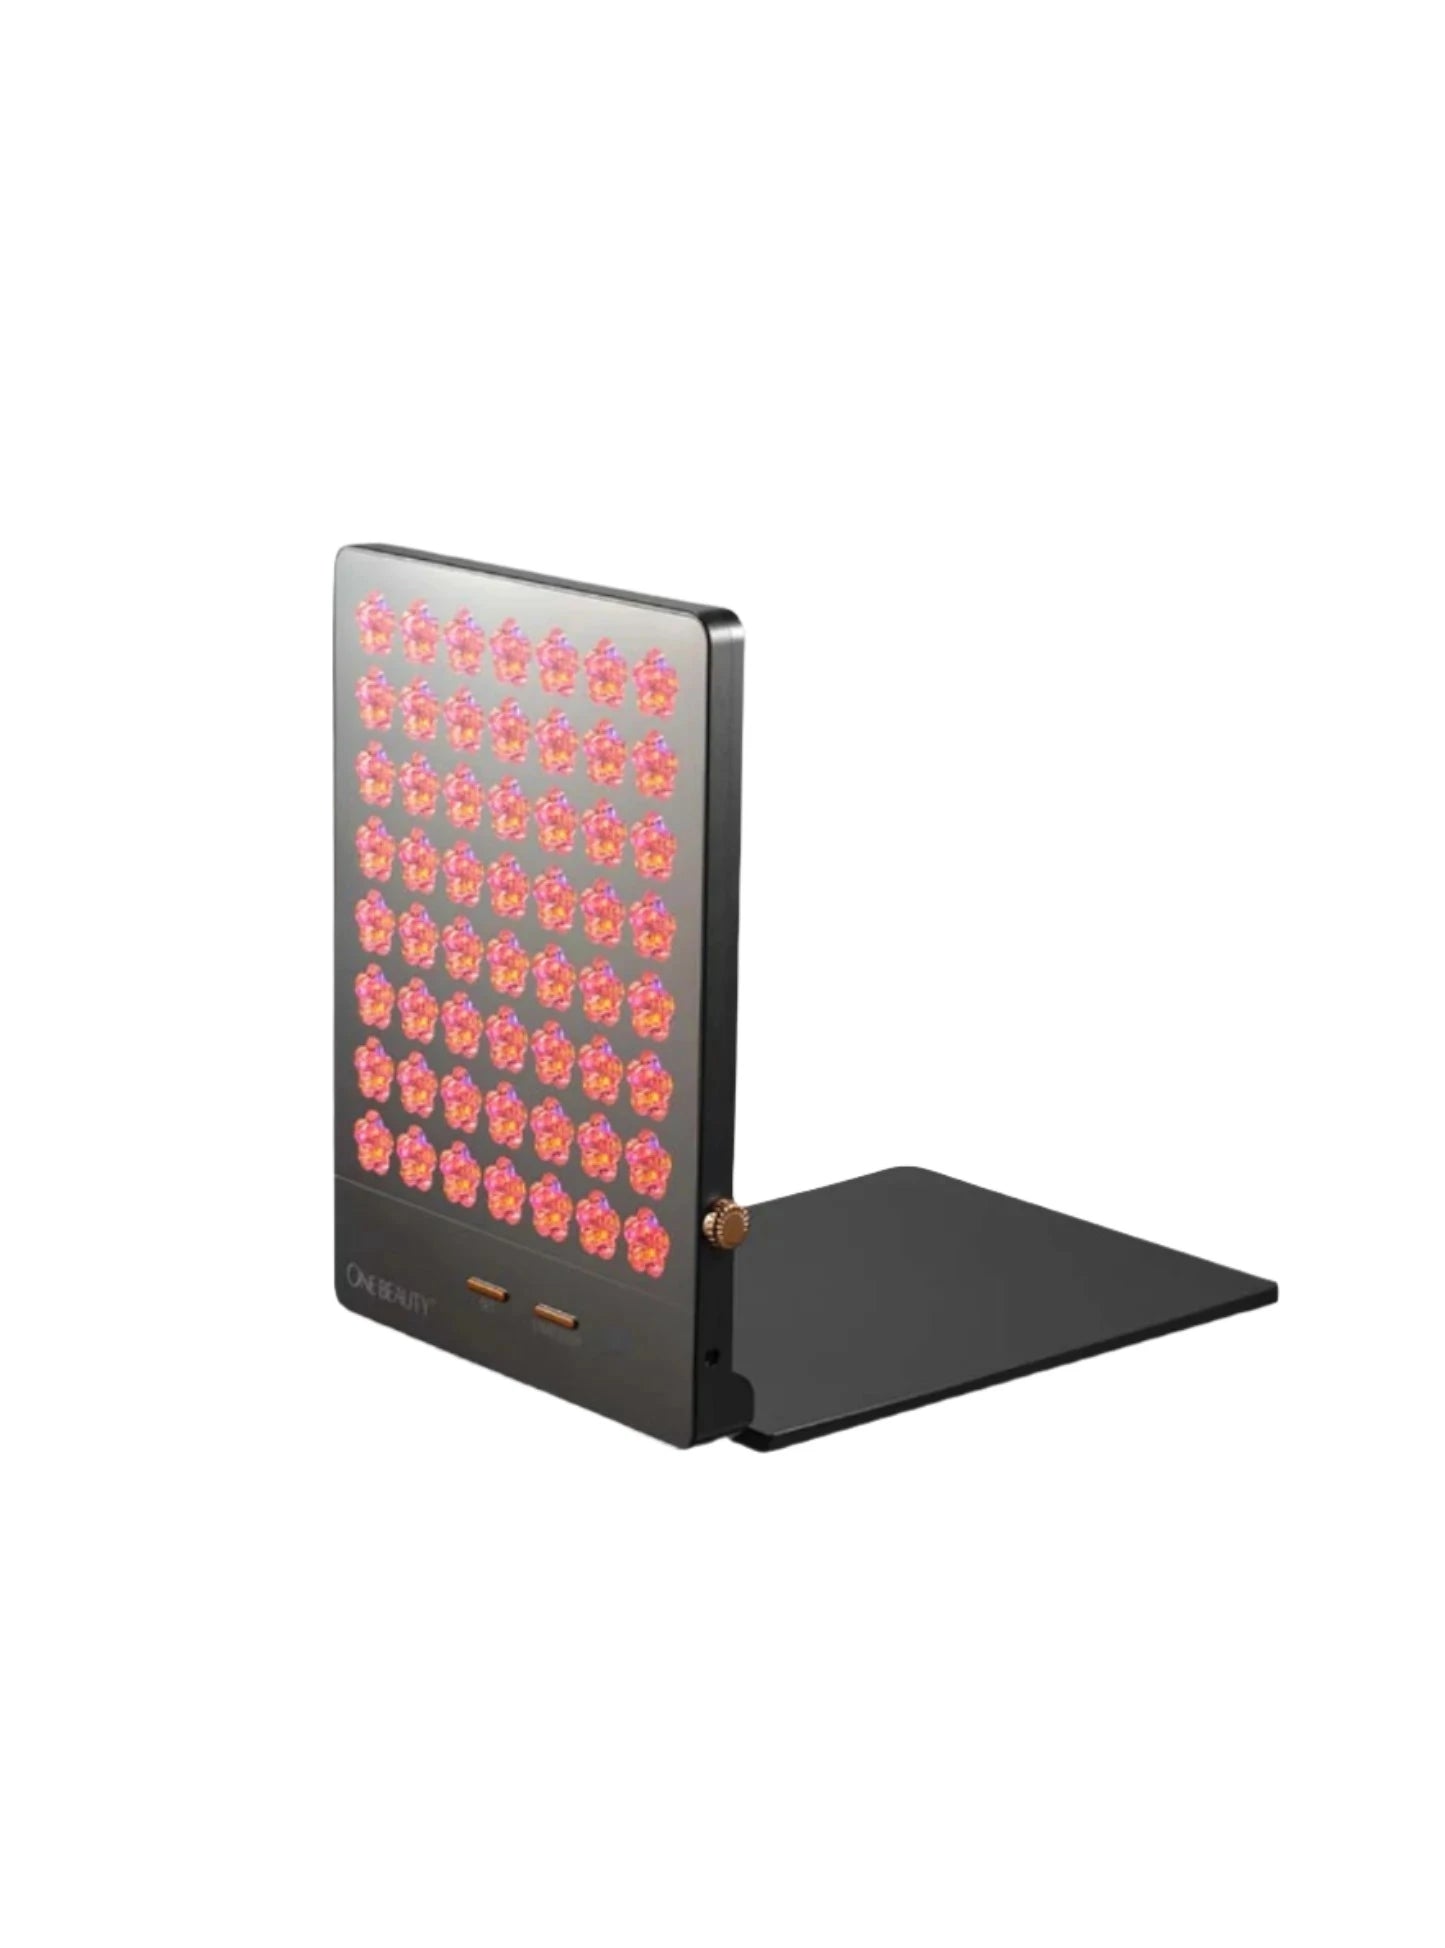 One Beauty Crystal Red Light Therapy Panel